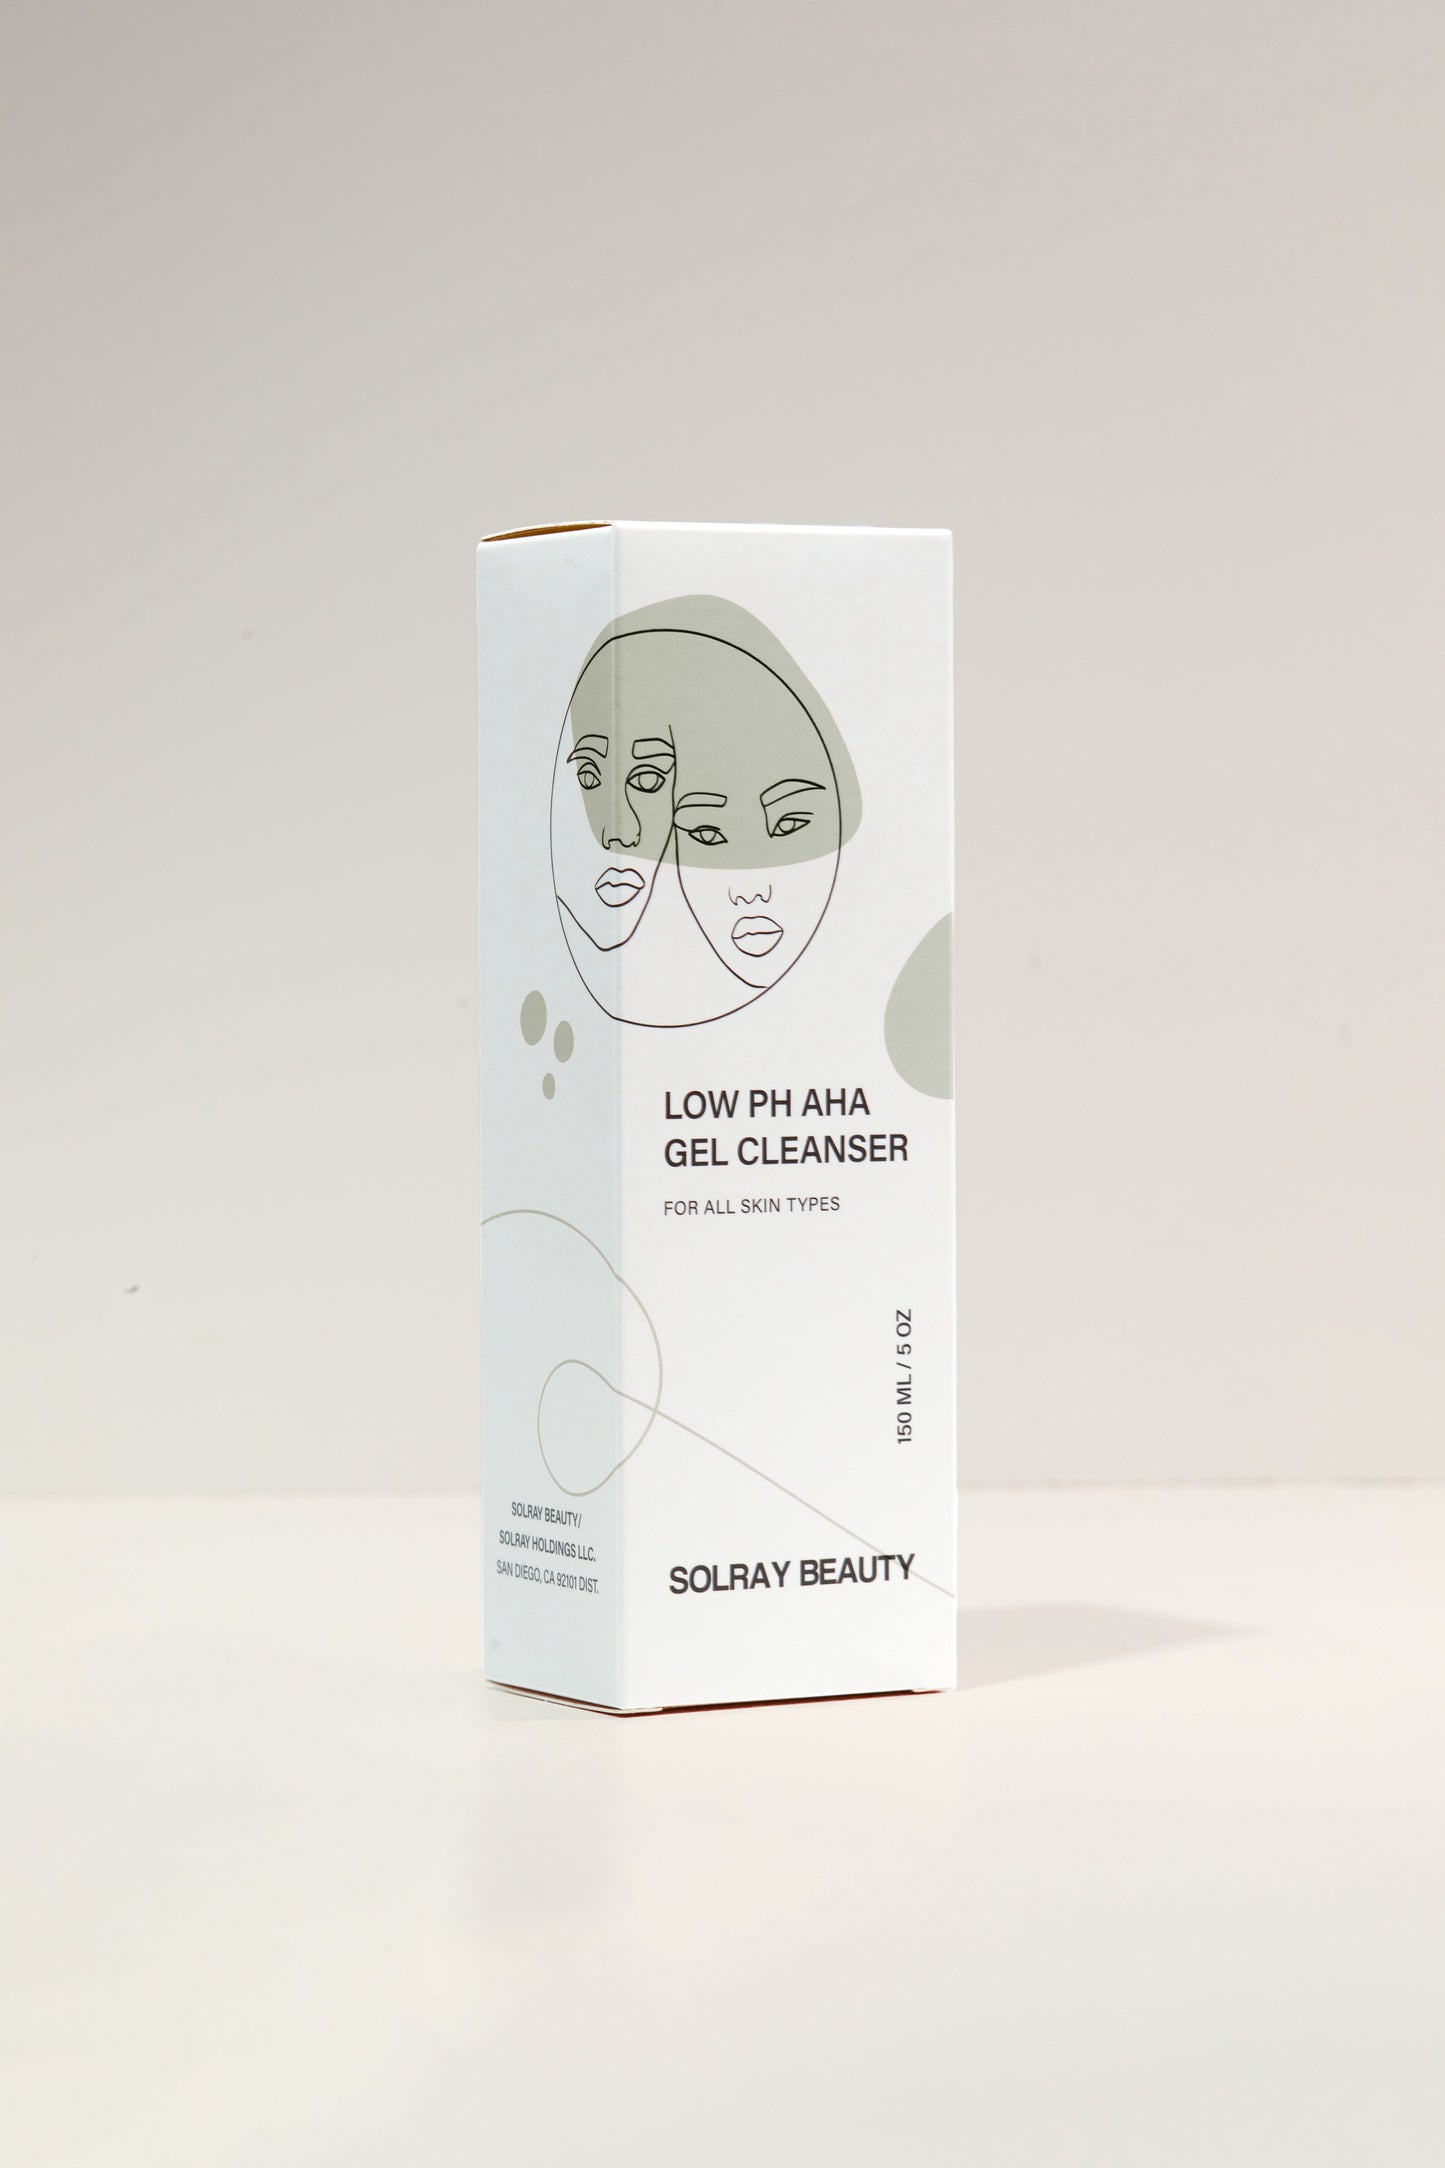 Box of SolRay Beauty's Low pH AHA Gel Cleanser, an all-natural skincare product with alpha-hydroxy acids, suitable for all skin types.